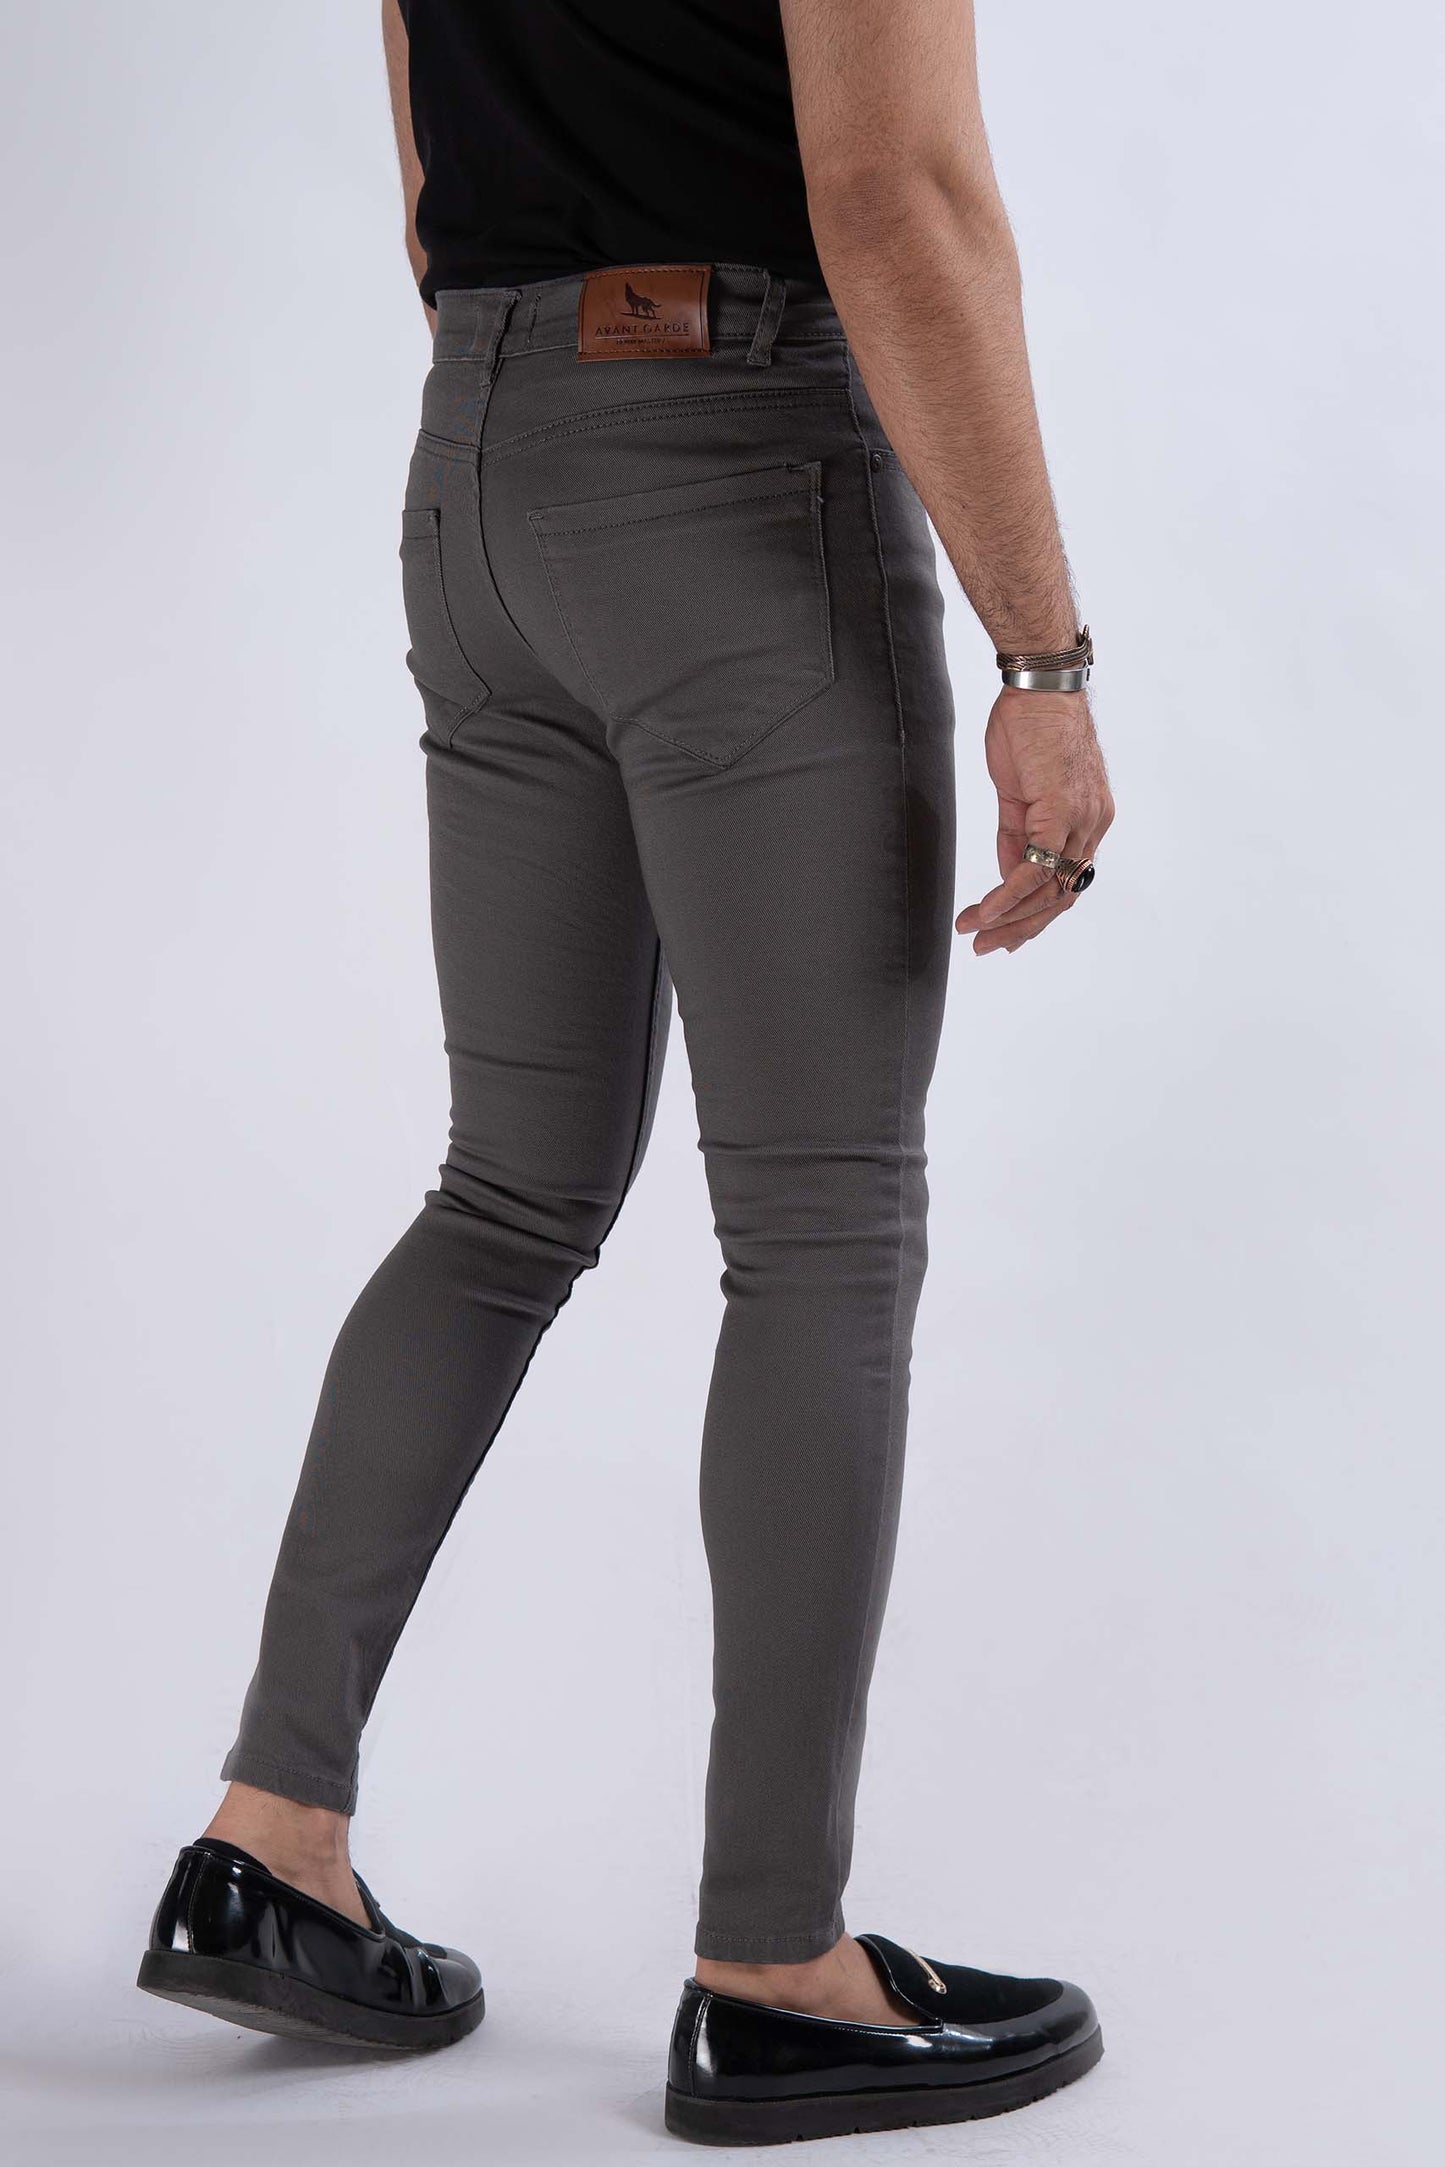 Charcoal Grey Twill Denim Jeans - Muscle Fit